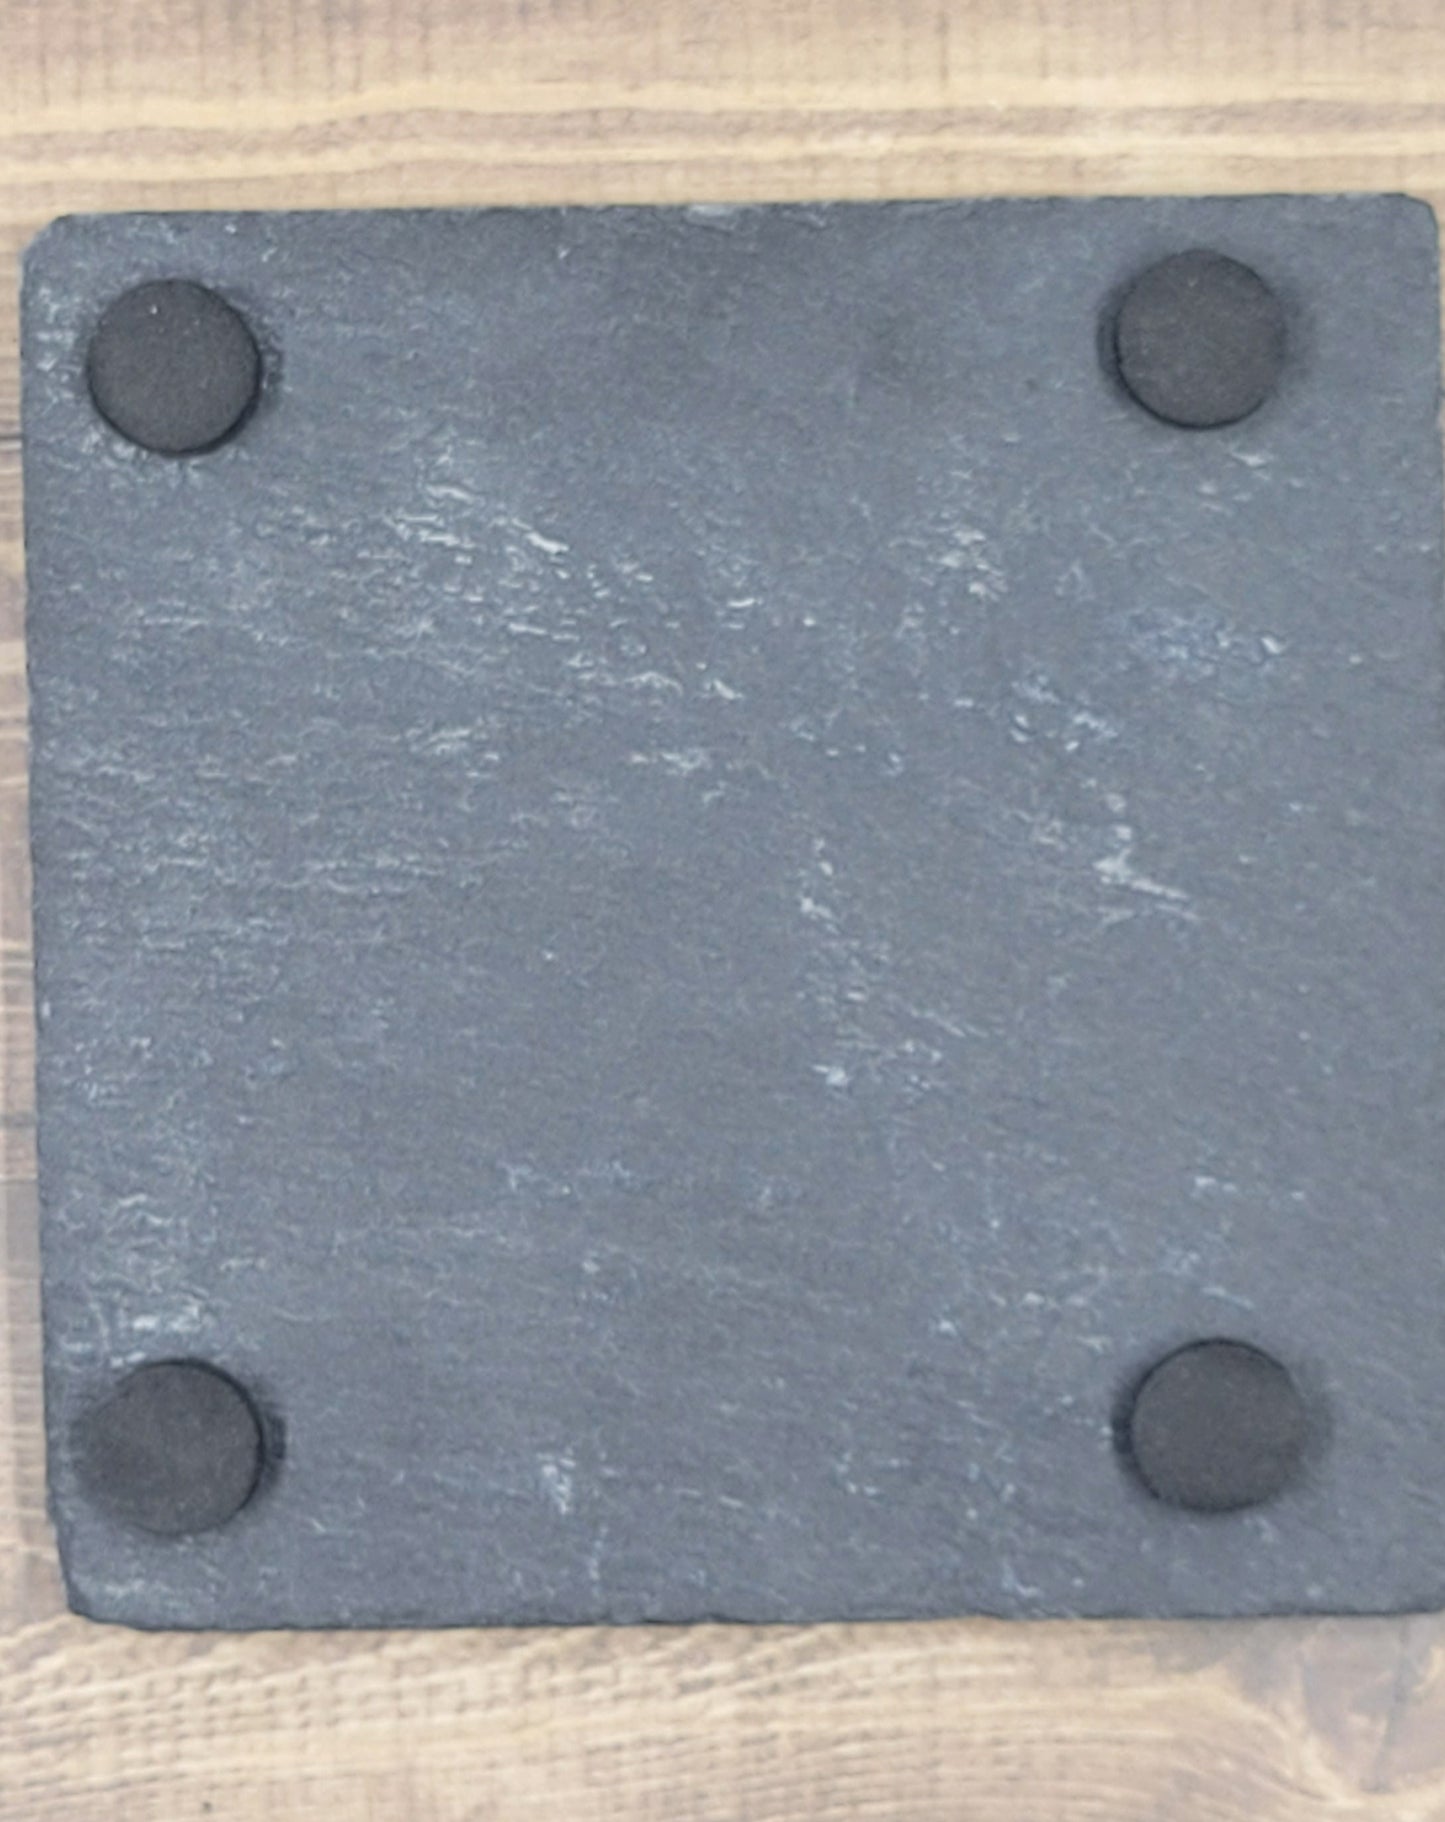 Jim Beam Natural Slate Coaster  These slate coasters will make a great addition to anyplace from your bar to your coffee table. These are actual stone slate measuring approximately 4" x 4". Each coaster will have 4 foam padded feet.